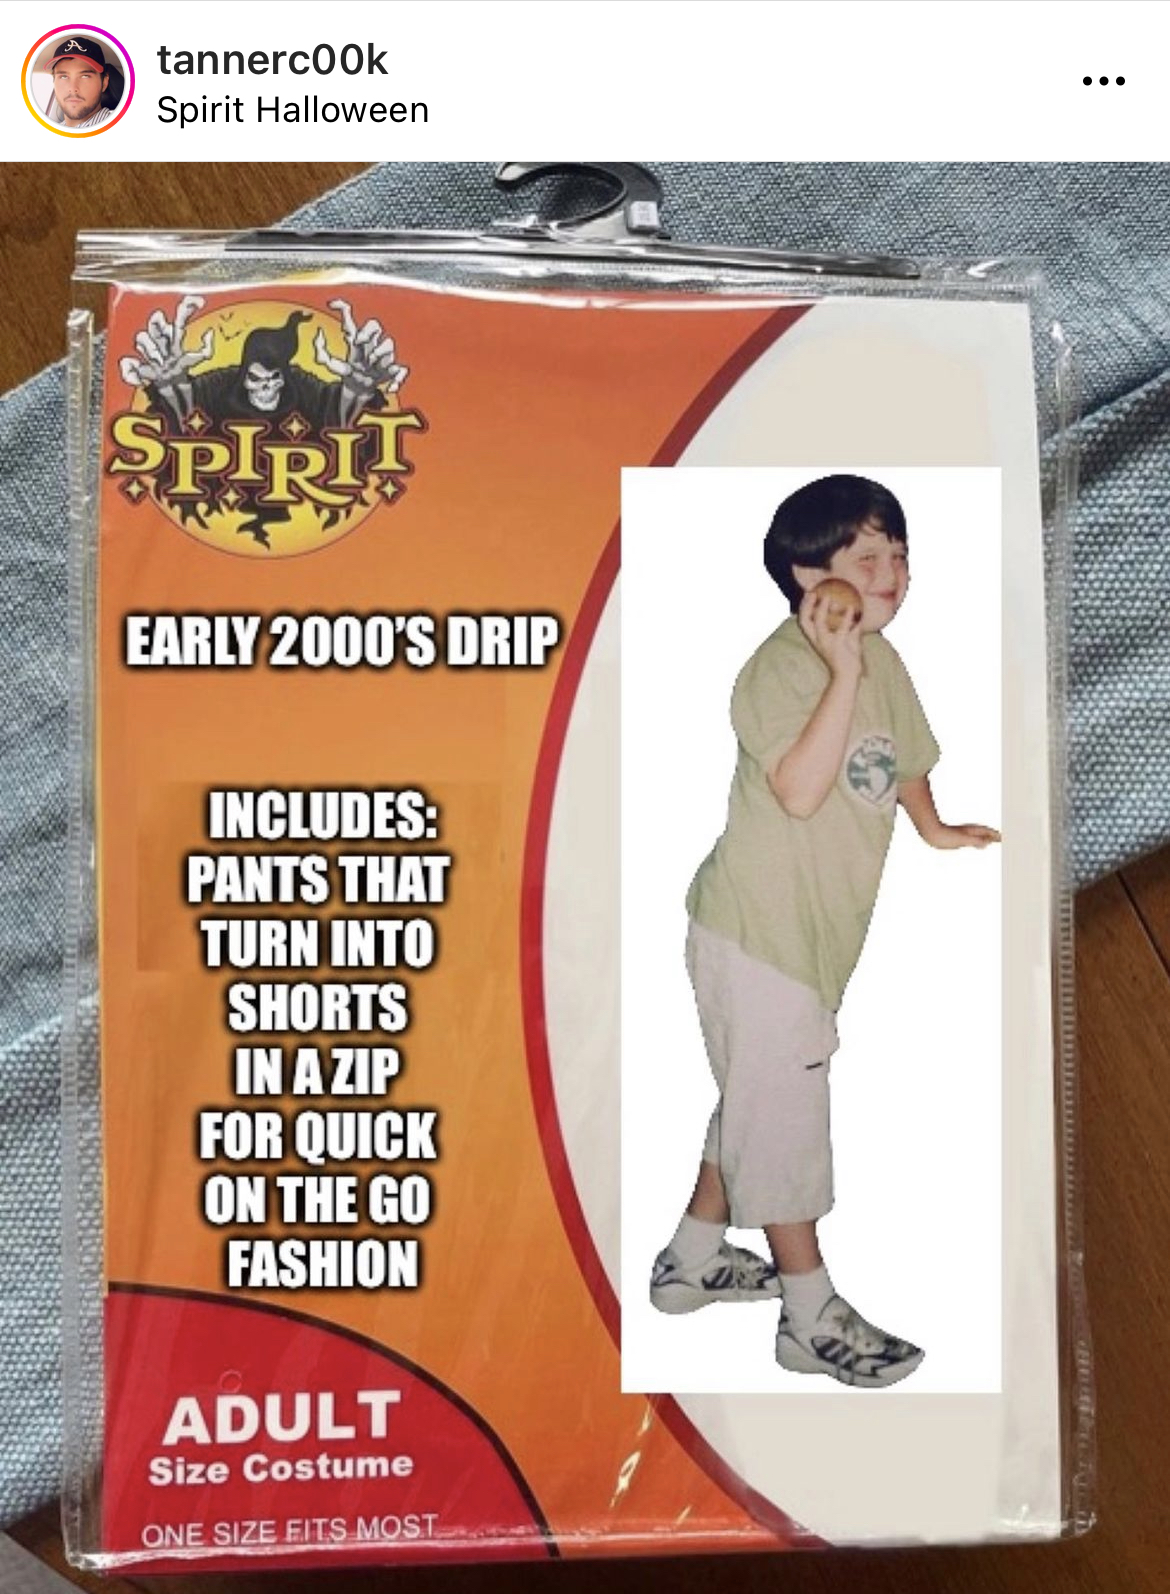 Costume Memes - spirit halloween - tannercook Spirit Halloween Spirit Early 2000'S Drip Includes Pants That Turn Into Shorts In A Zip For Quick On The Go Fashion Adult Size Costume One Size Fits Most